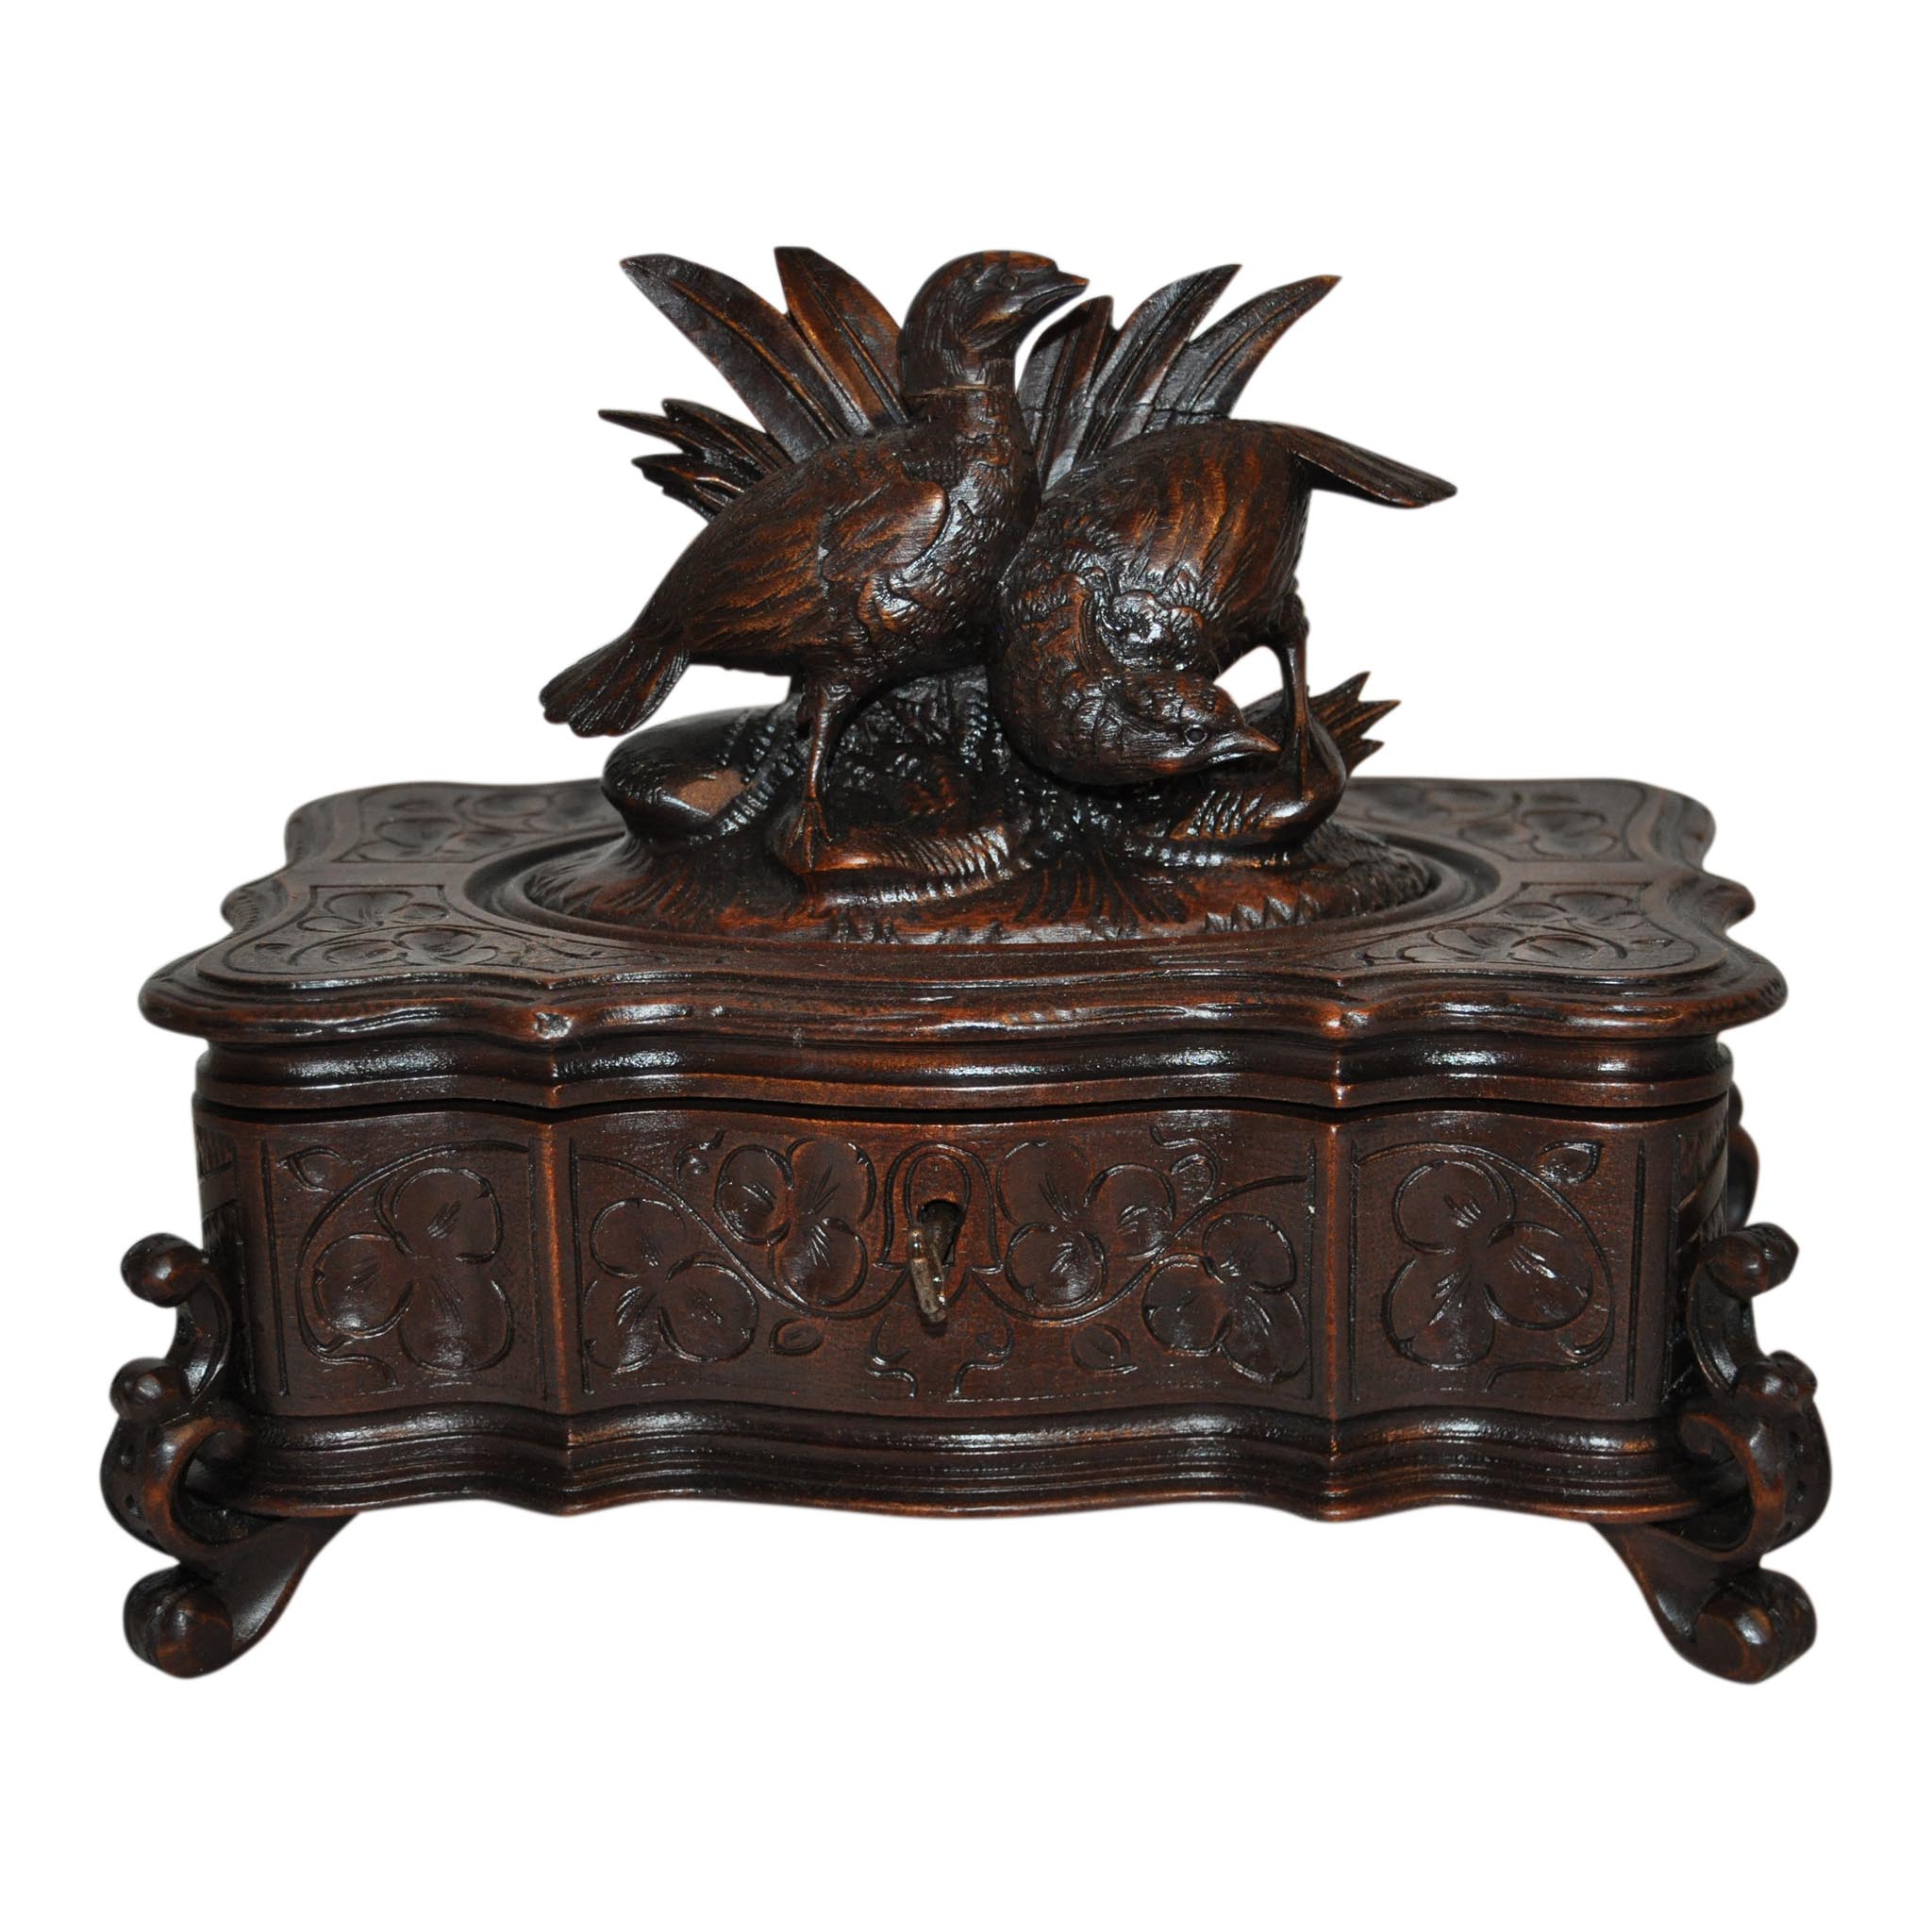 Carved Jewelry Box with Quail